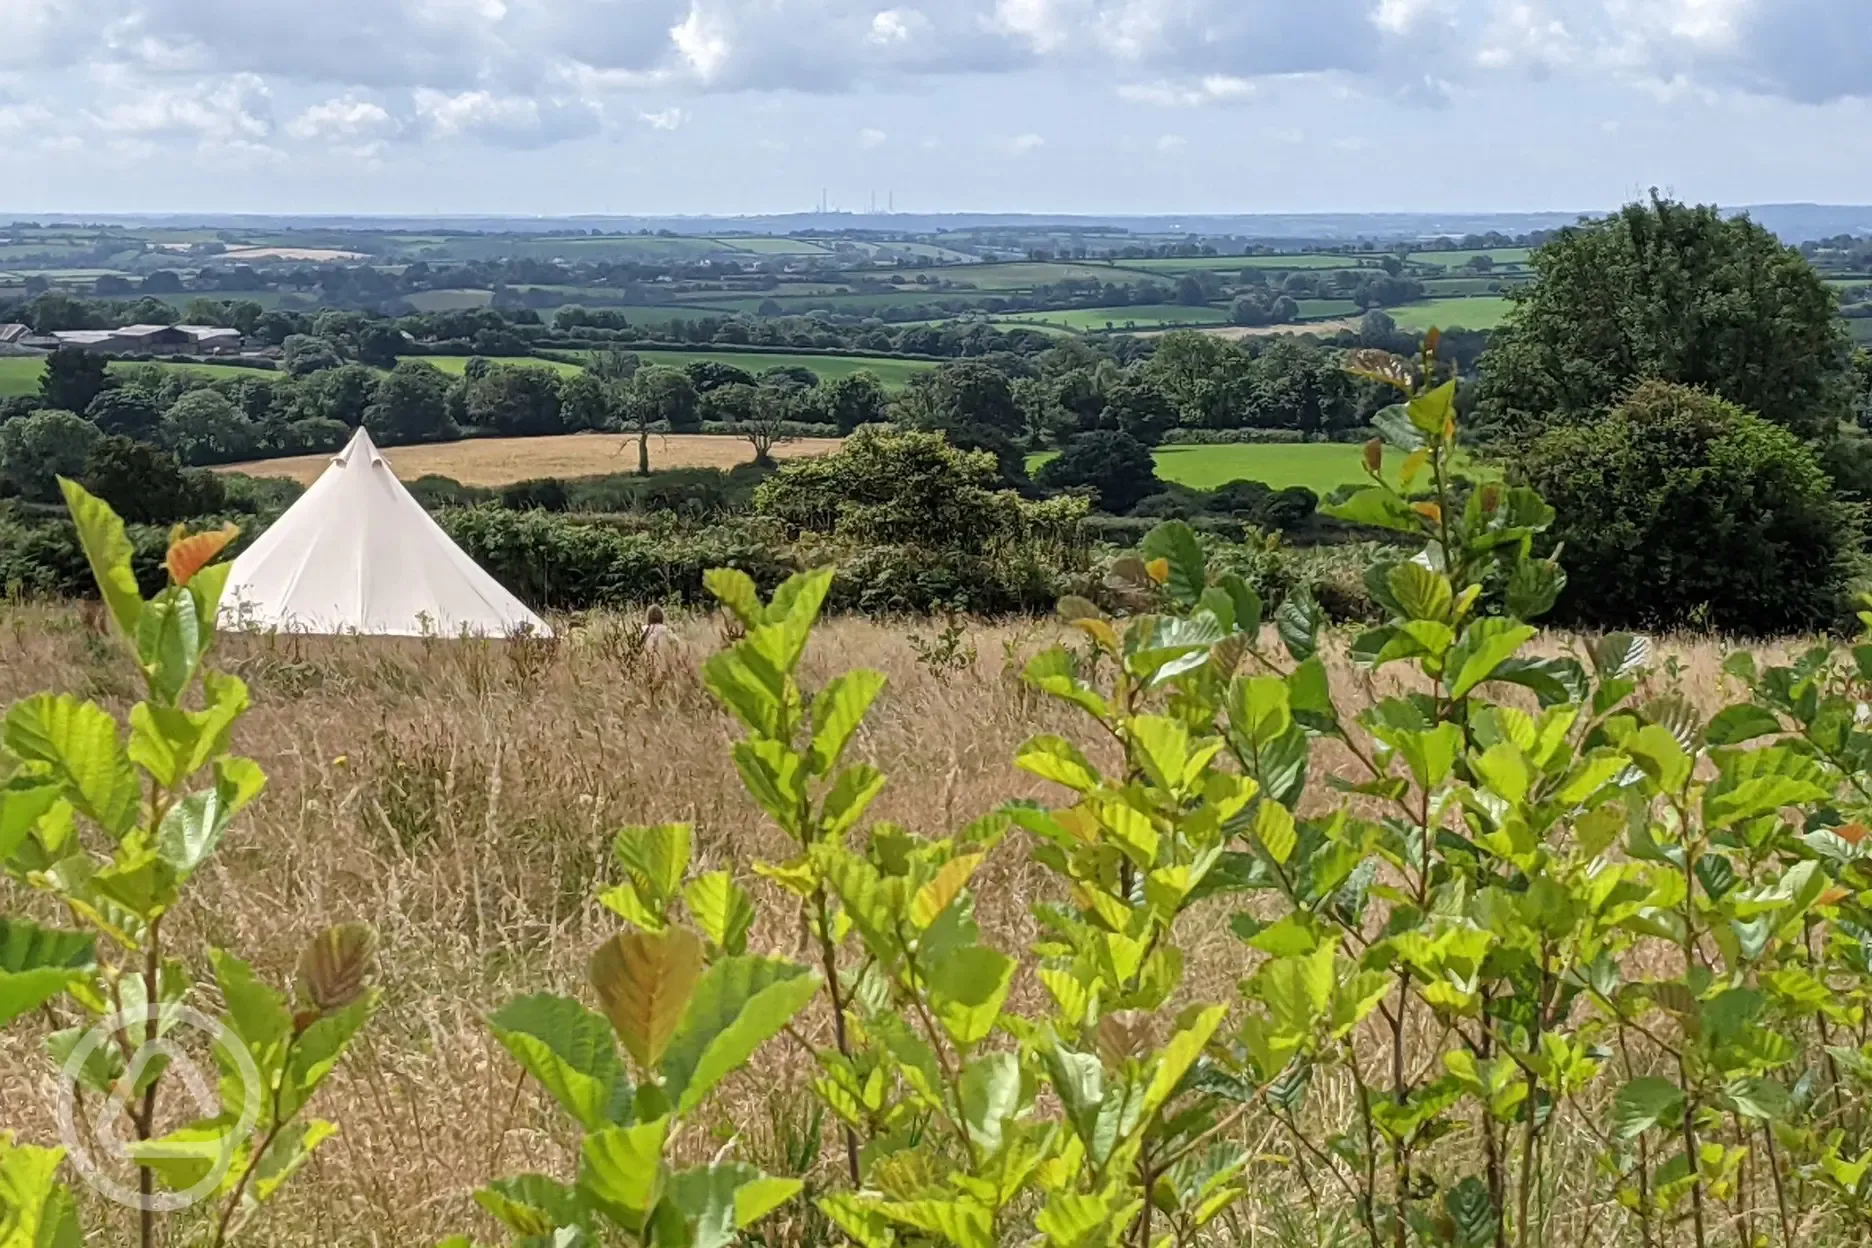 Field with bell tent